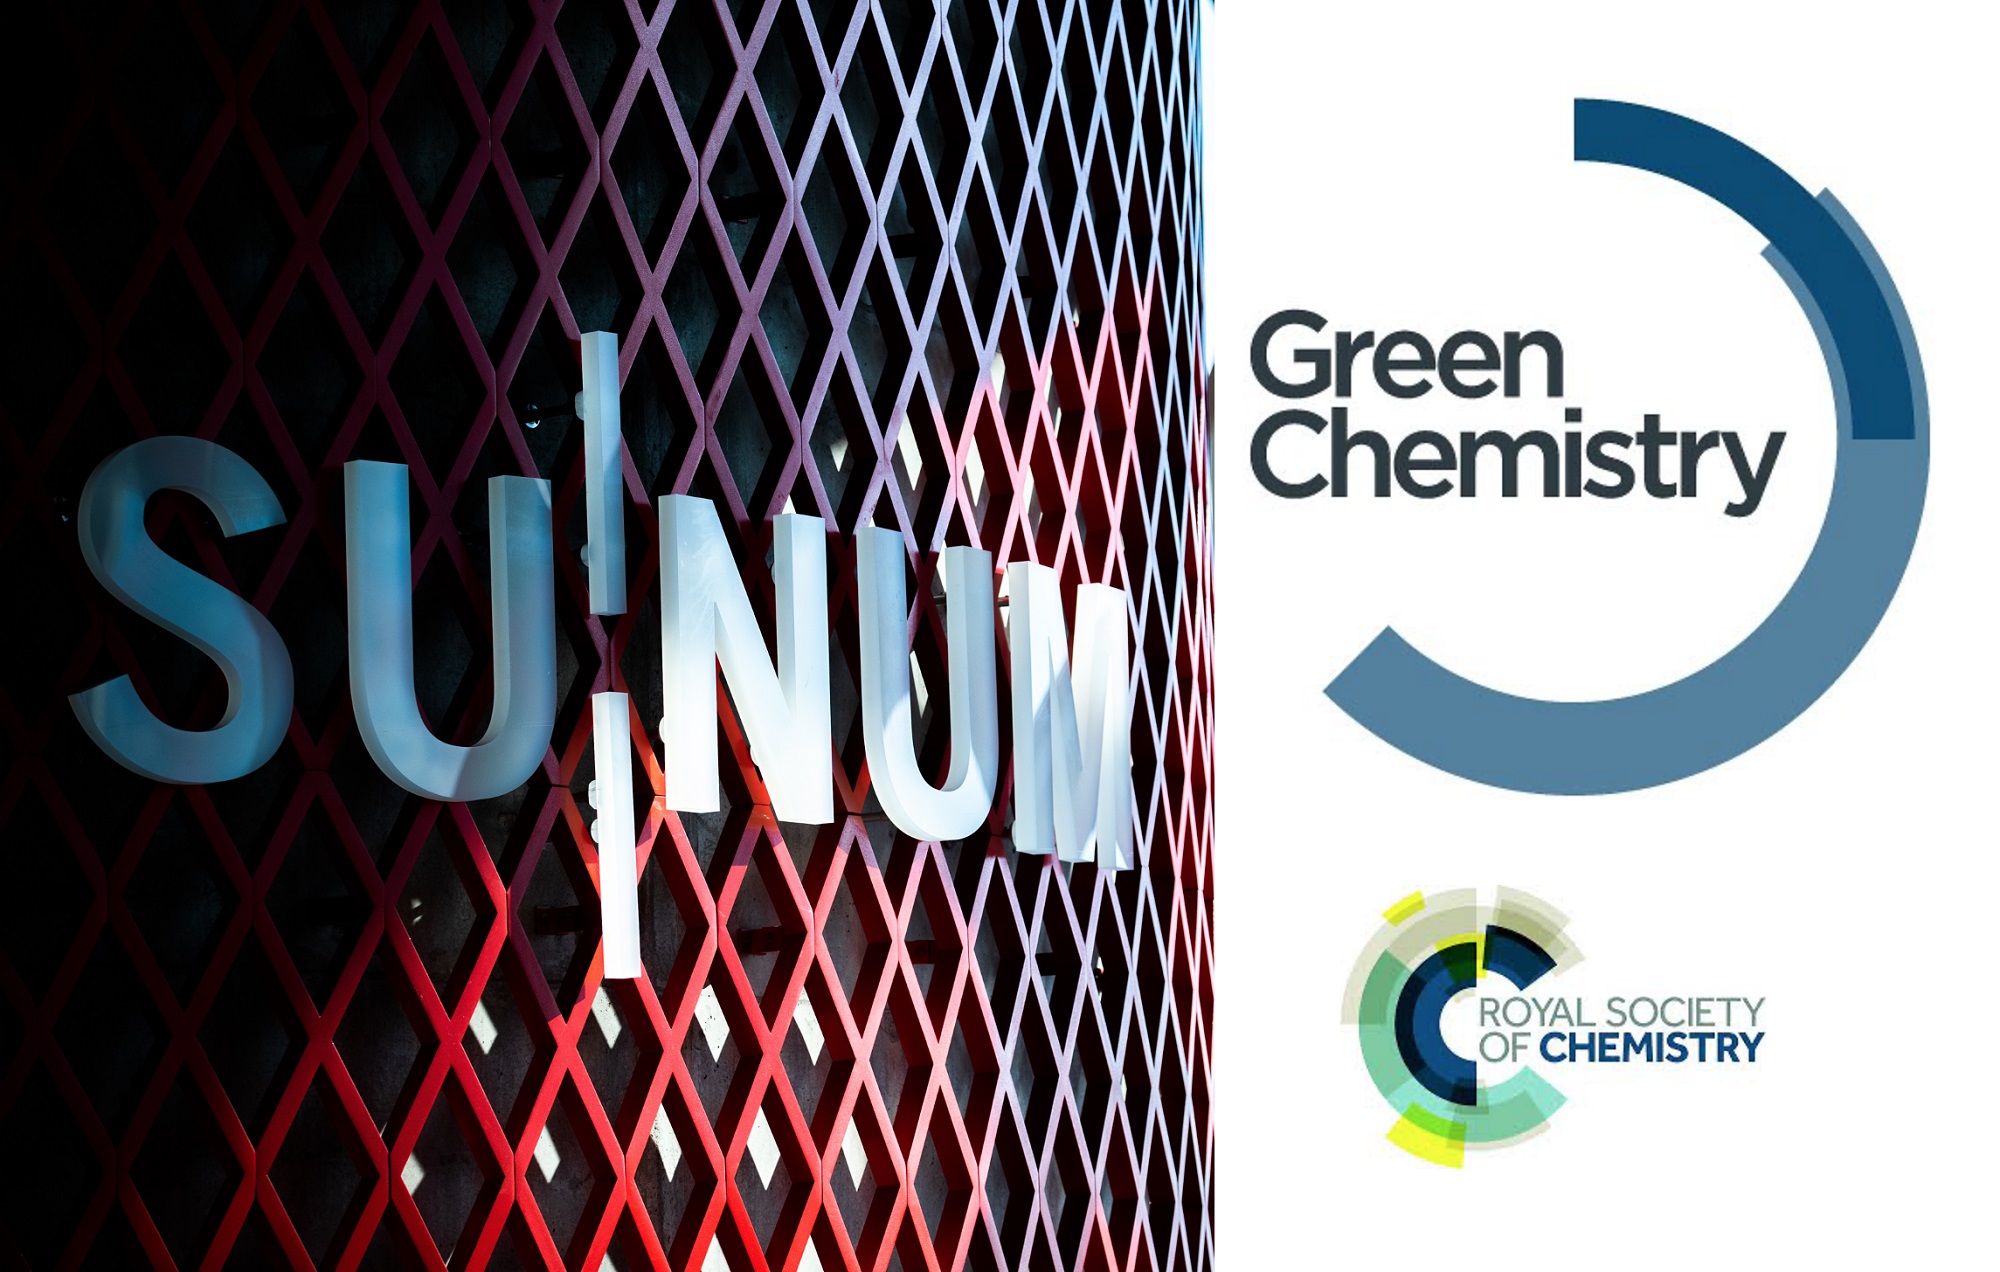 SUNUM Researchers' Article Published in RSC Green Chemistry